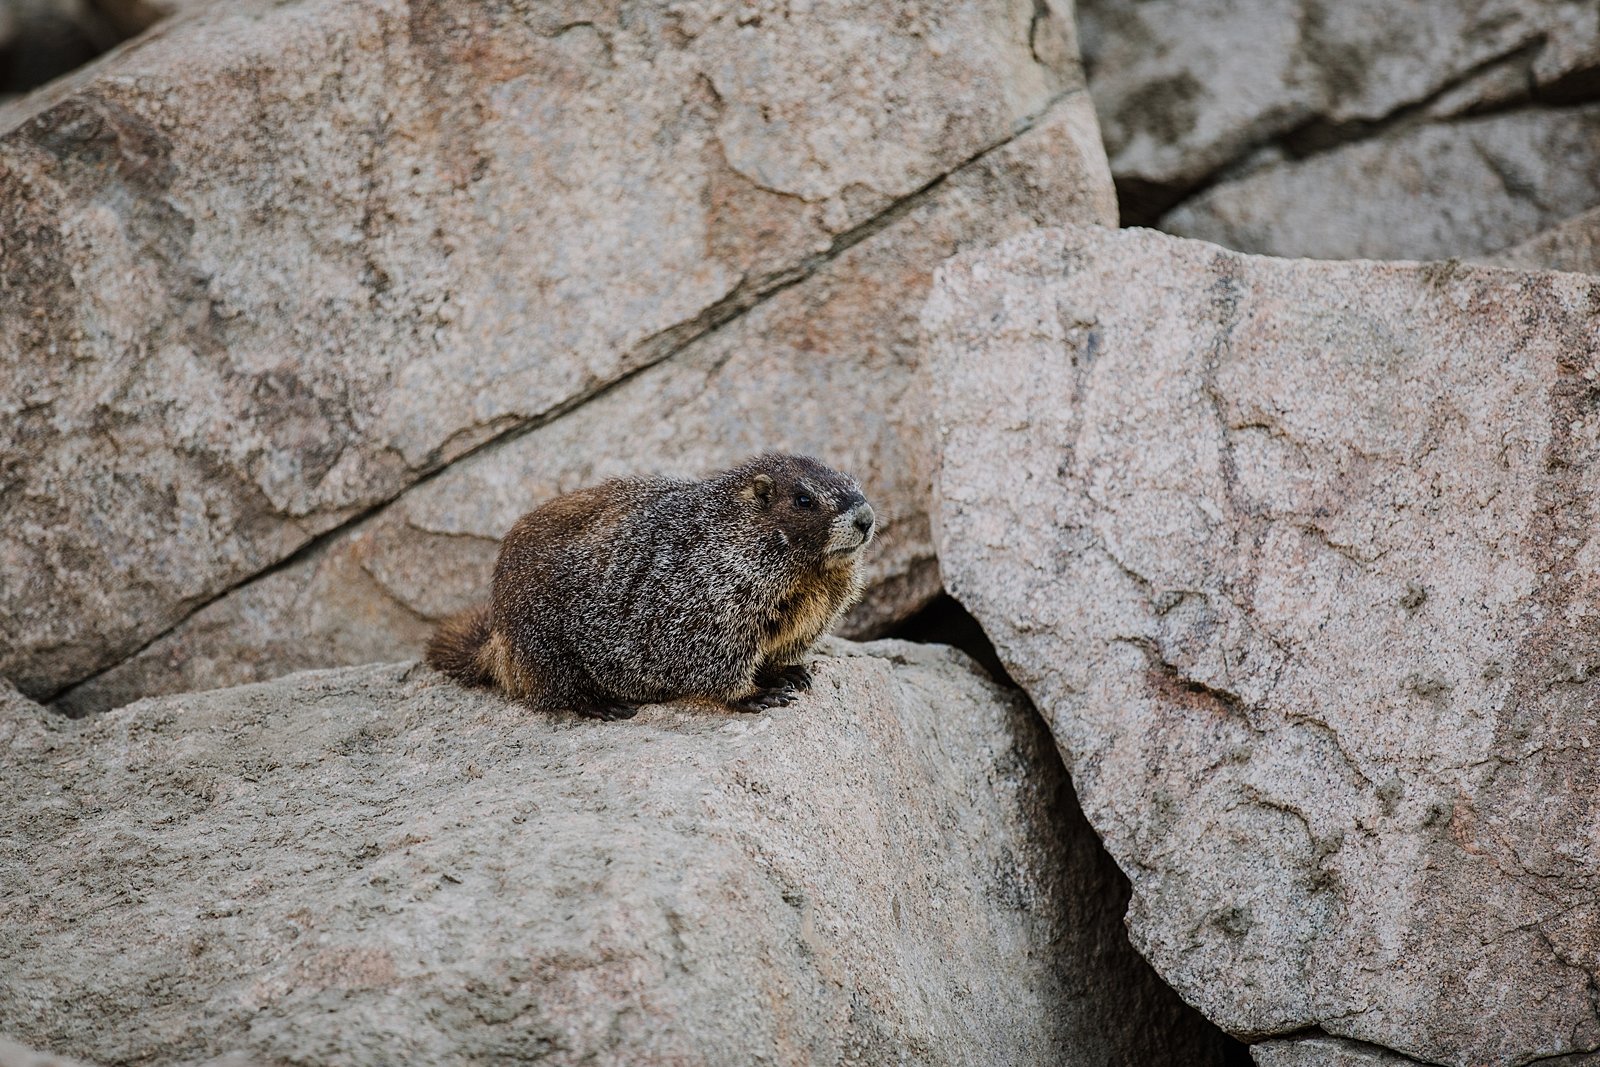 marmot standing on rock, marmots high in the colorado rocky mountains, marmot interrupting elopement, marmot near alpine lake, marmot in the mountains, marmot squeaking